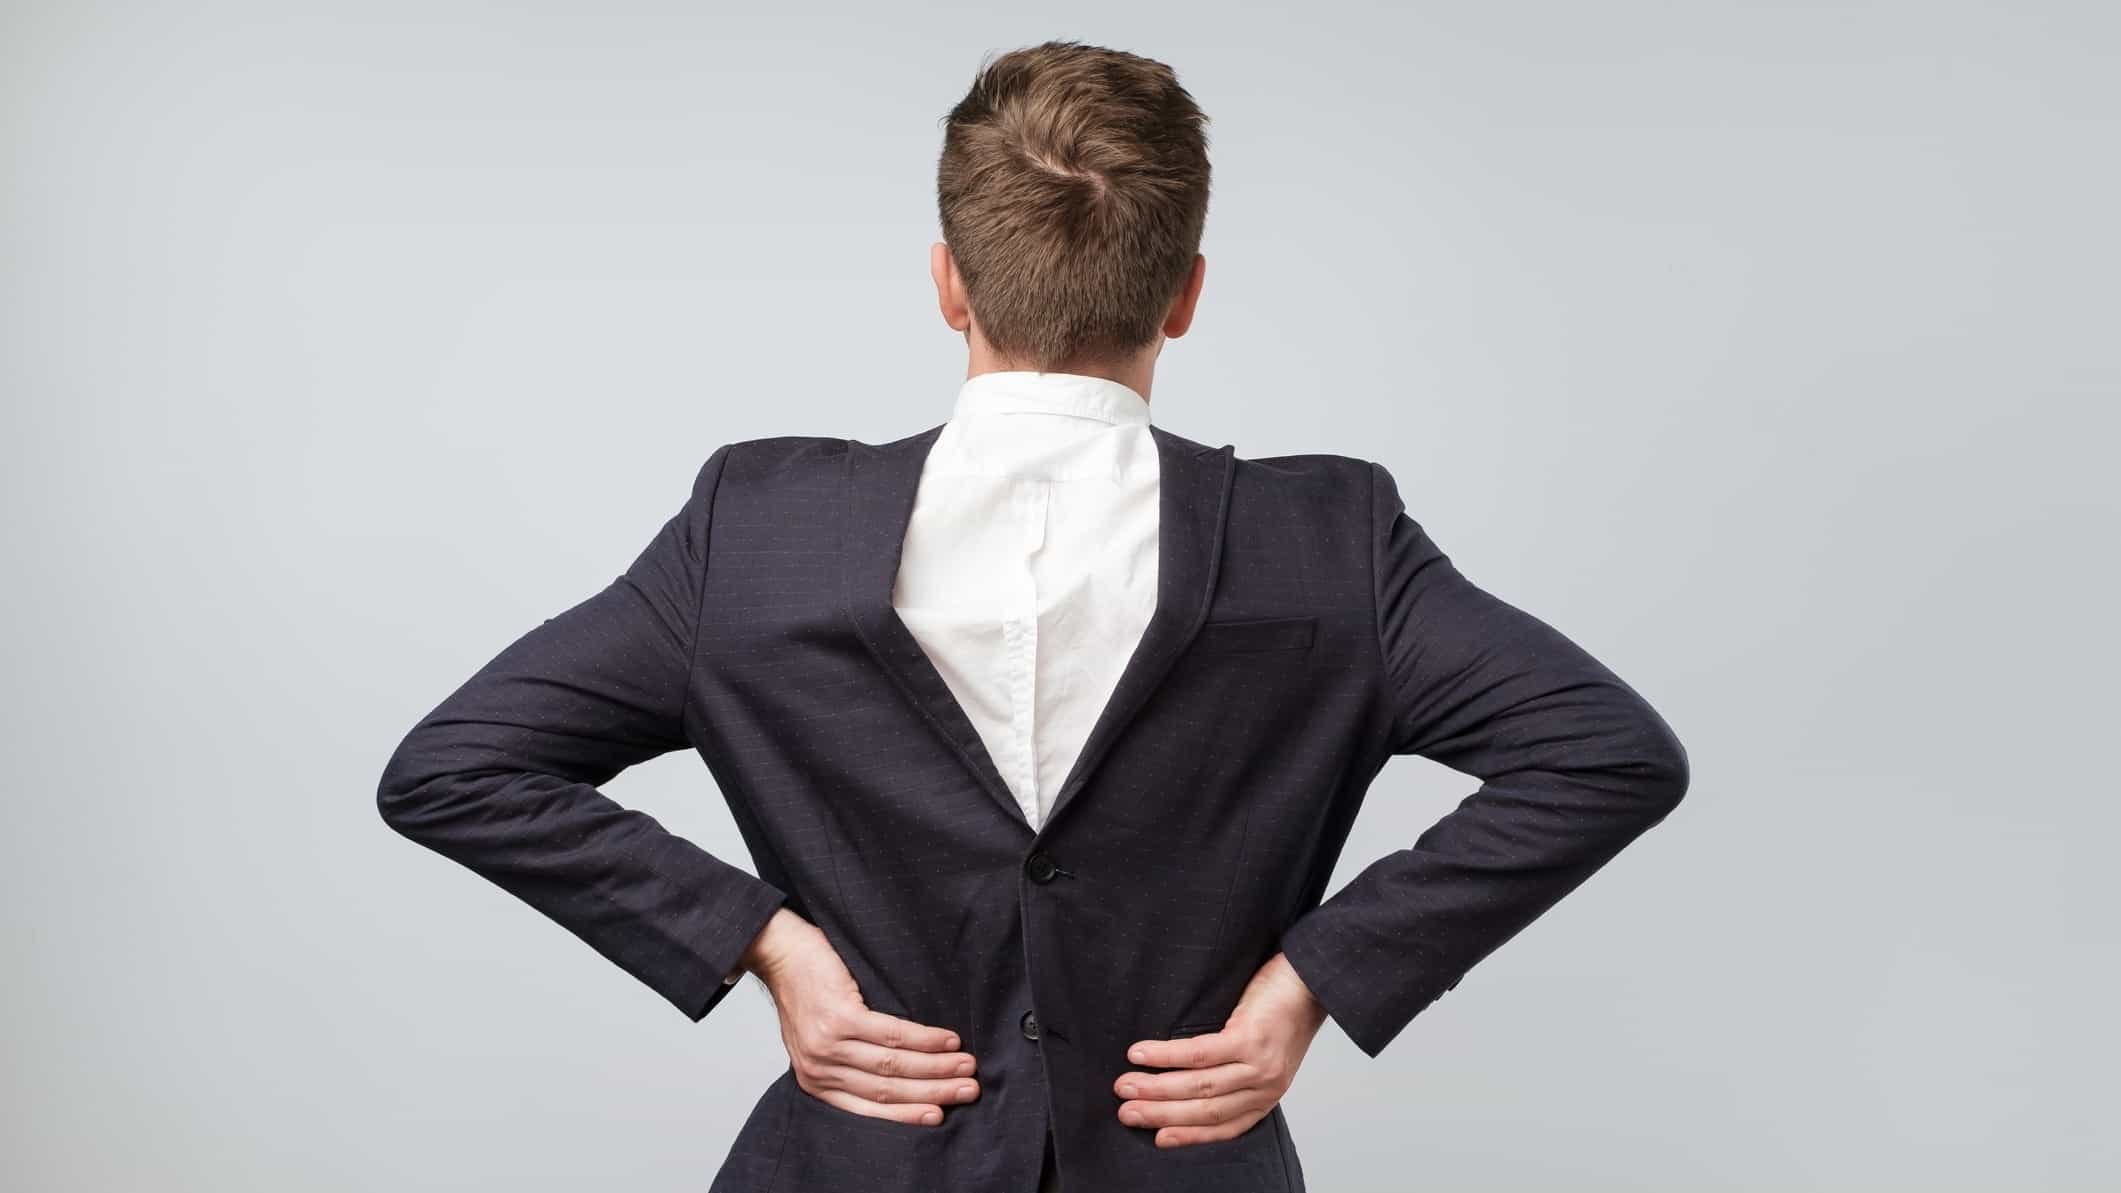 A man wears a suit in reverse, so the shirt and jacket are on backwards.